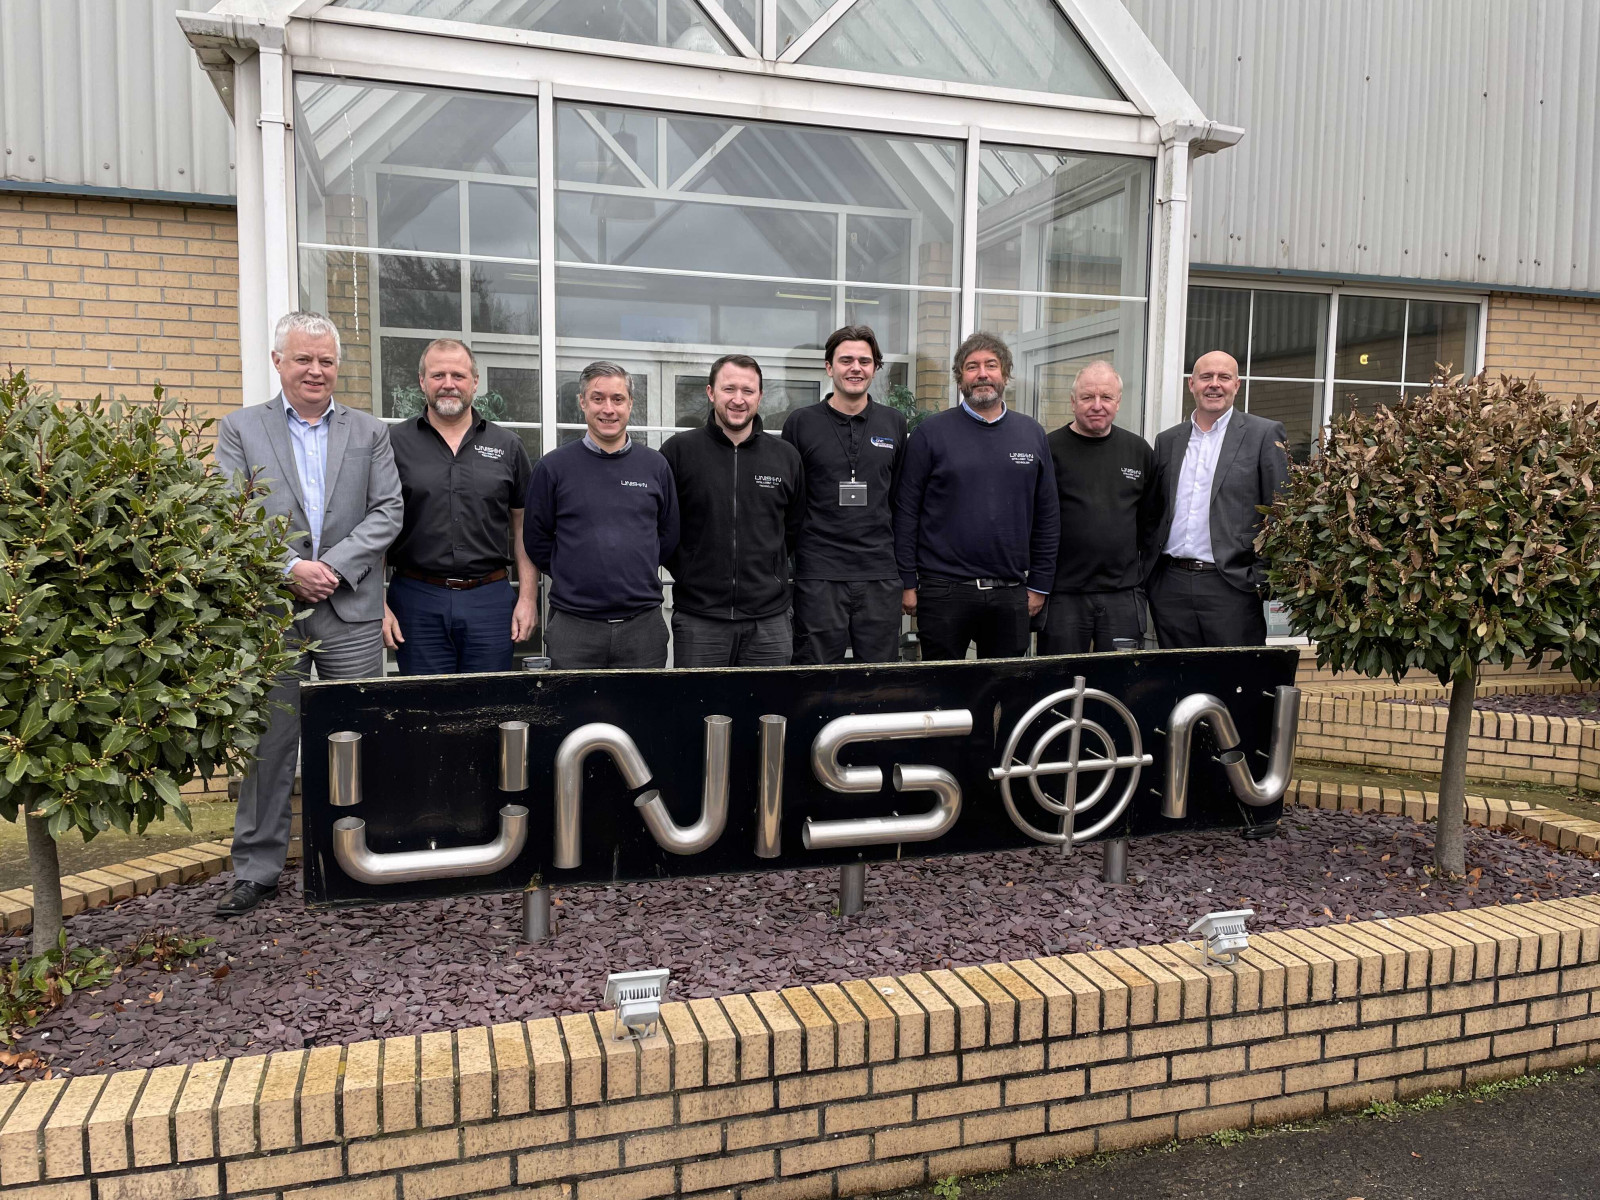 Unison Ltd, the inventors of all-electric tube manipulation, celebrate 50 years